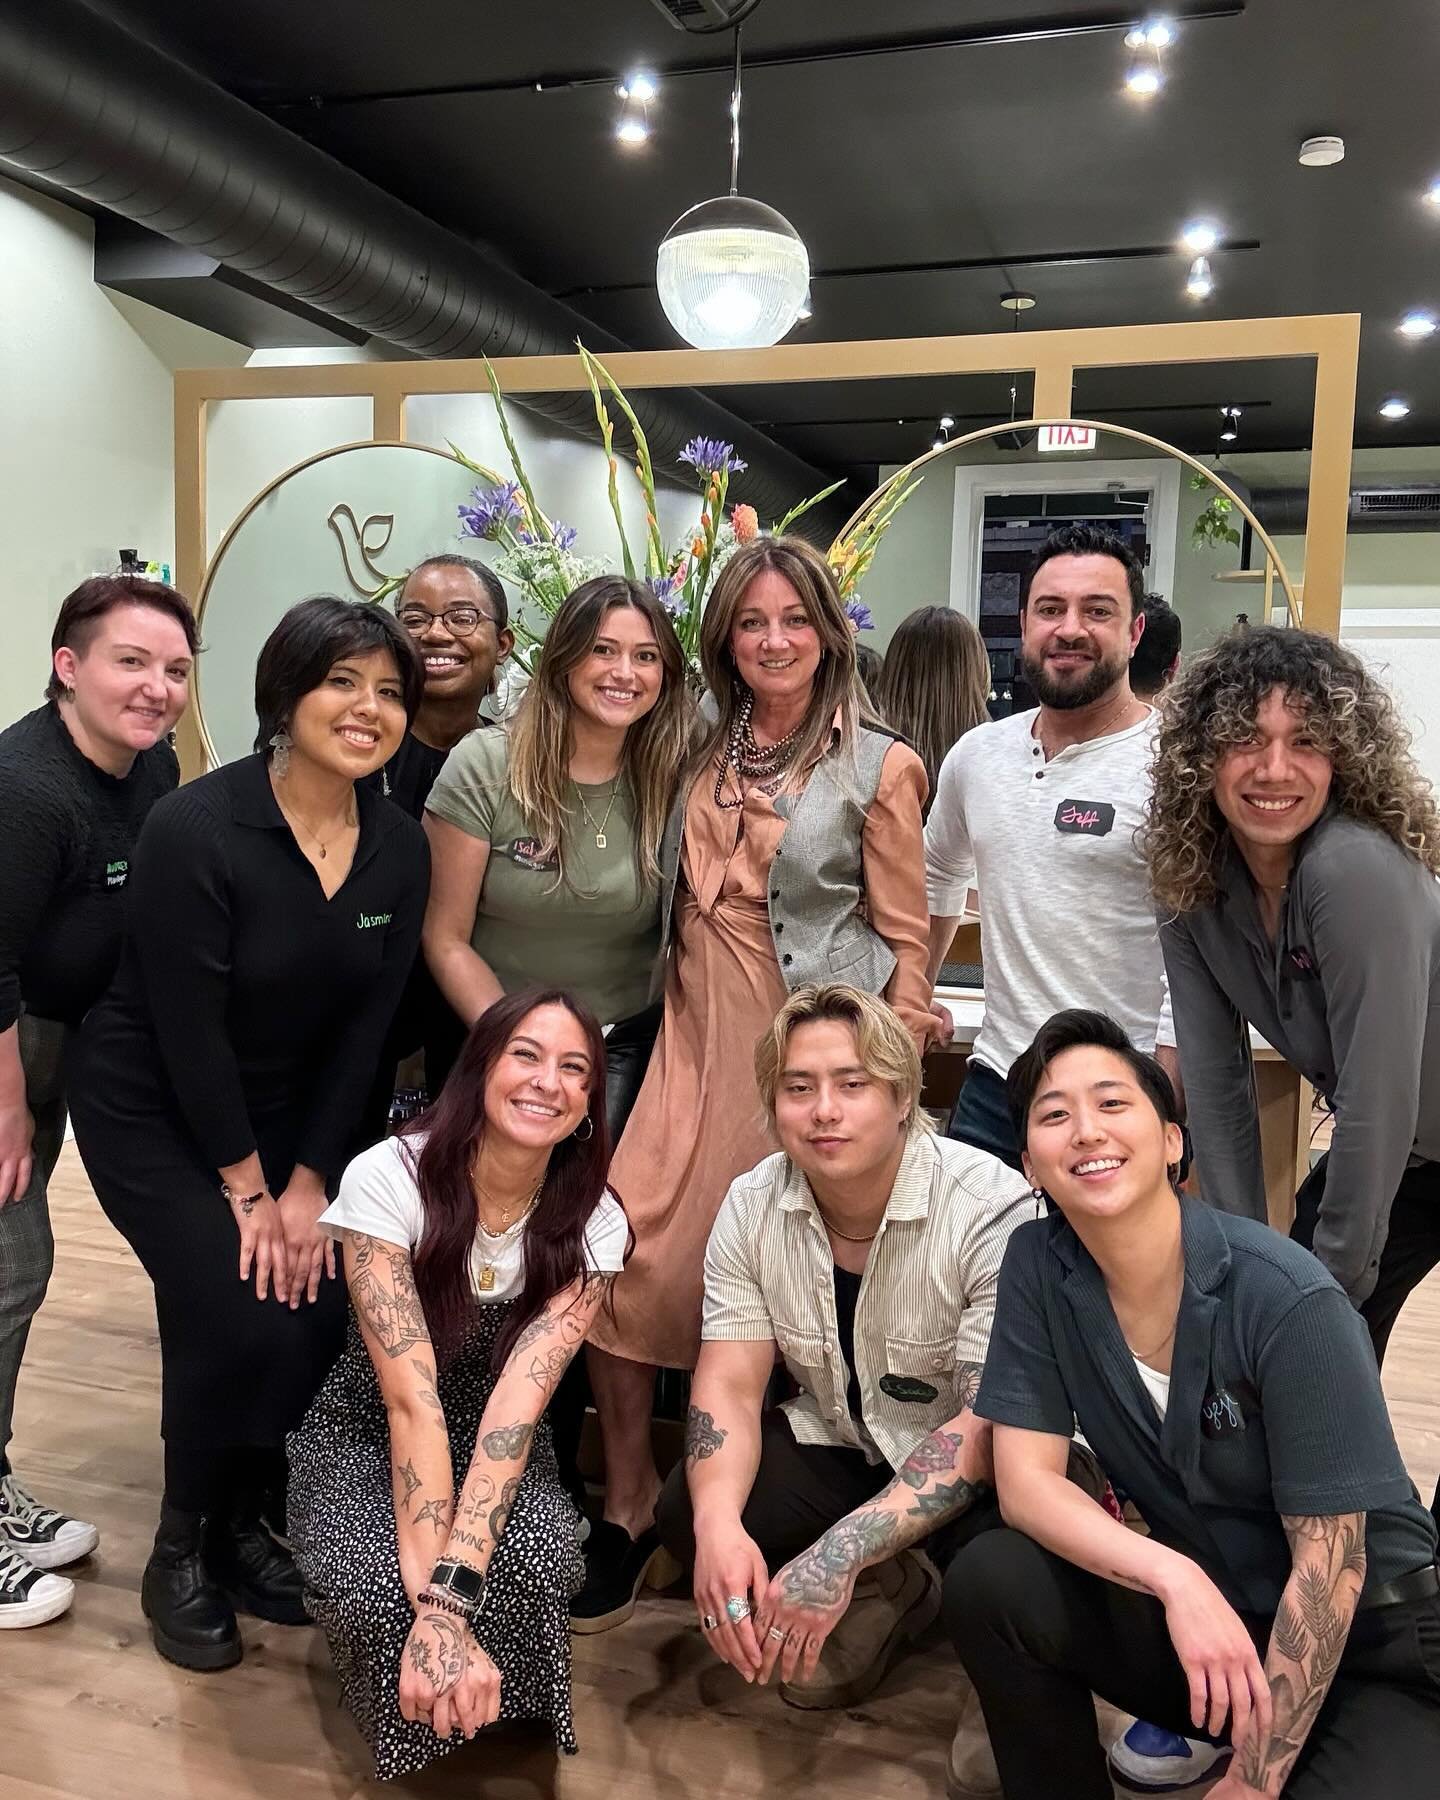 Thank you to everyone who stopped by Salon Shiloh during the Lincoln Park Chamber Wine Stroll! We loved seeing new faces in here and appreciate all of your support! A special thanks to Soul Prime @soulprimechicago for providing your delicious food. H